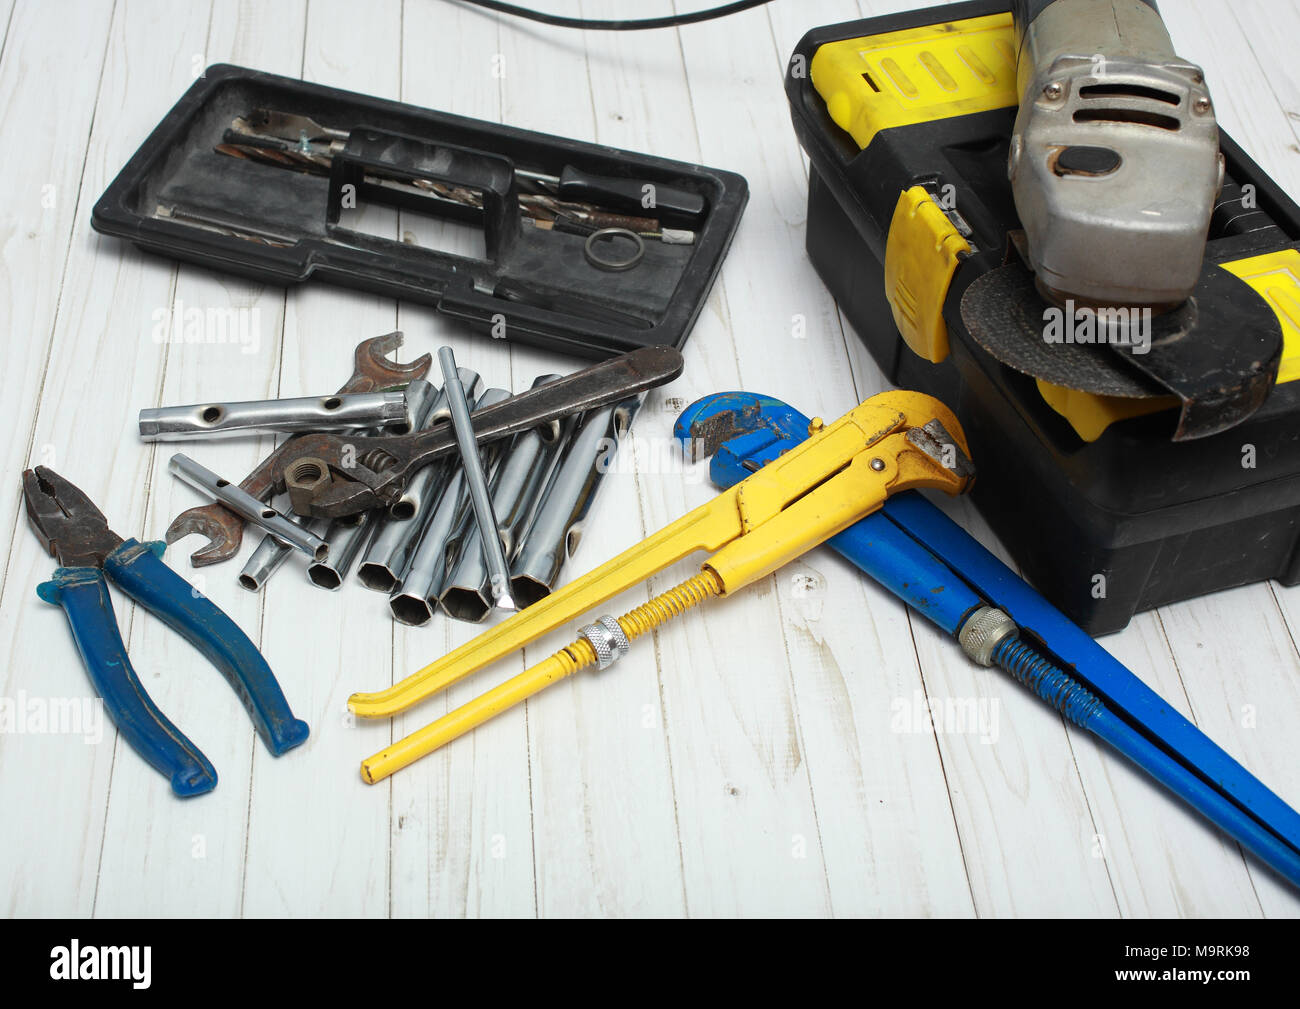 The owner laid out his tools on the table. Stock Photo